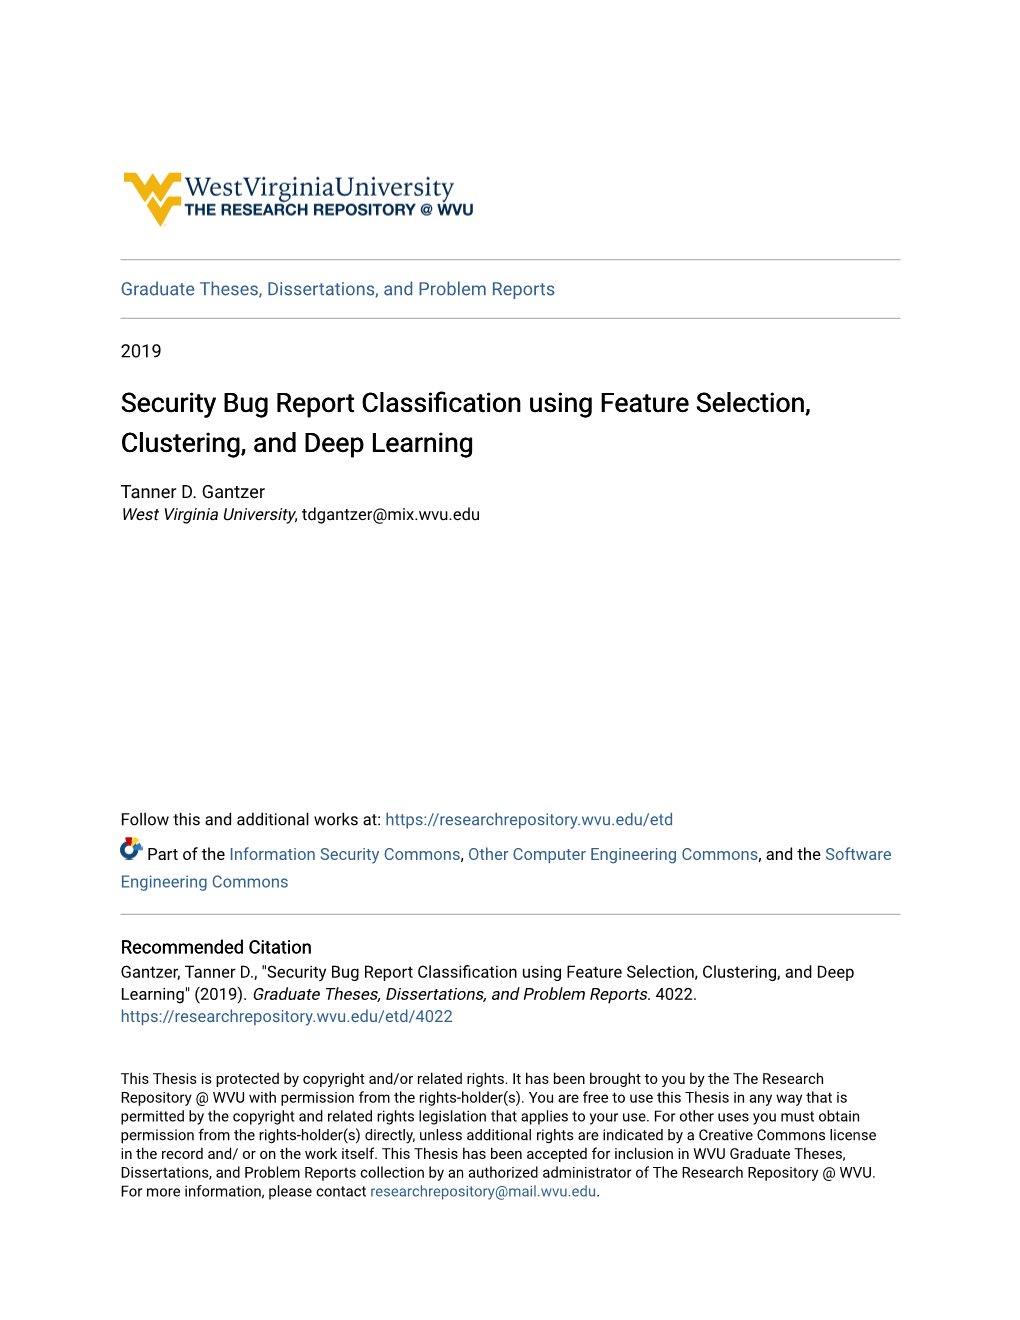 Security Bug Report Classification Using Feature Selection, Clustering, and Deep Learning Tanner D